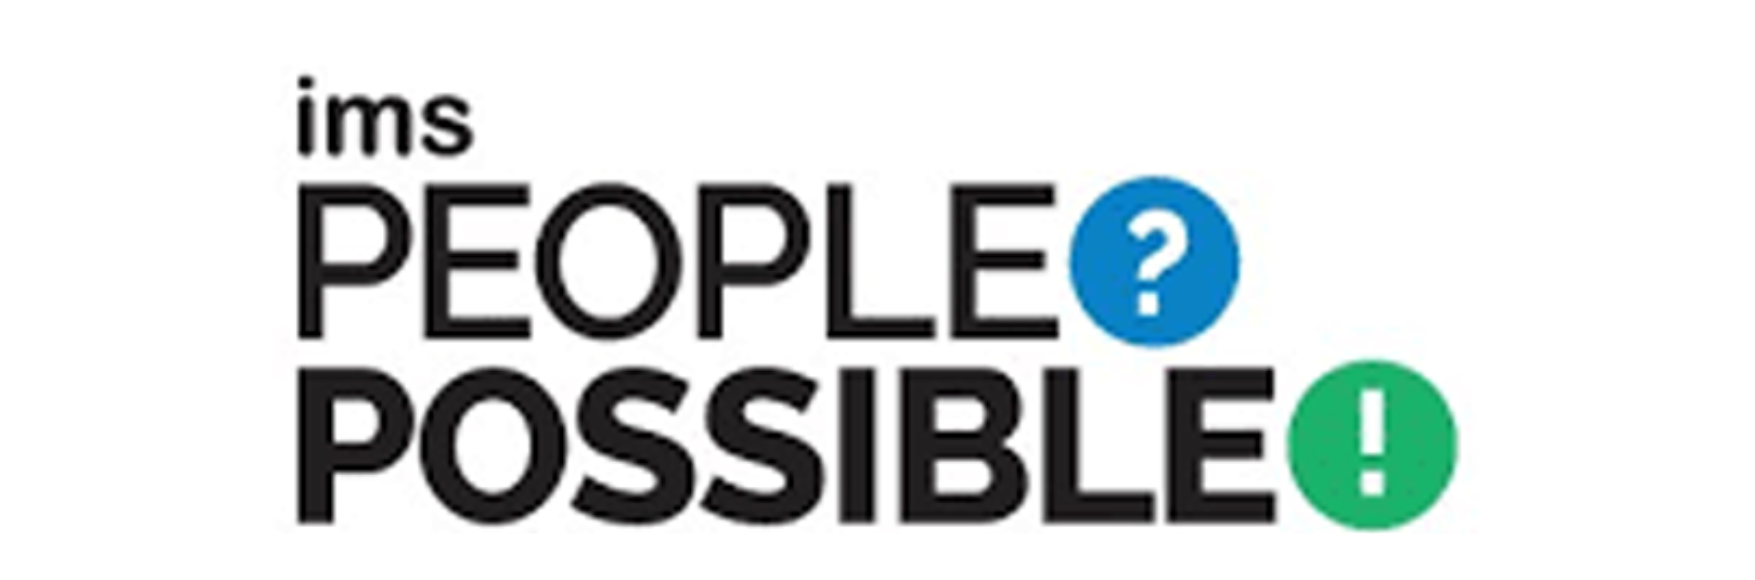 IMS People Possible logo